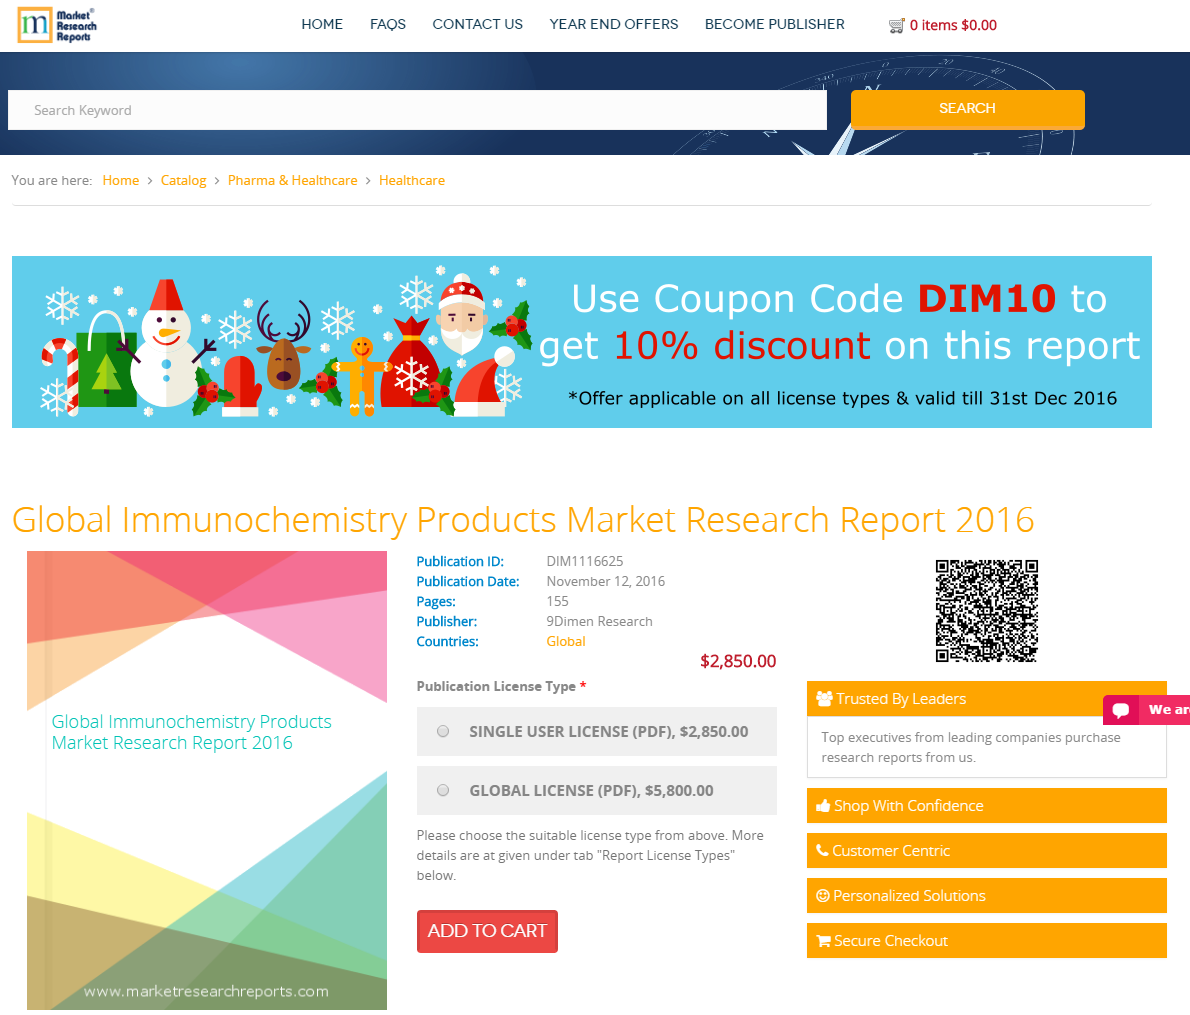 Global Immunochemistry Products Market Research Report 2016'